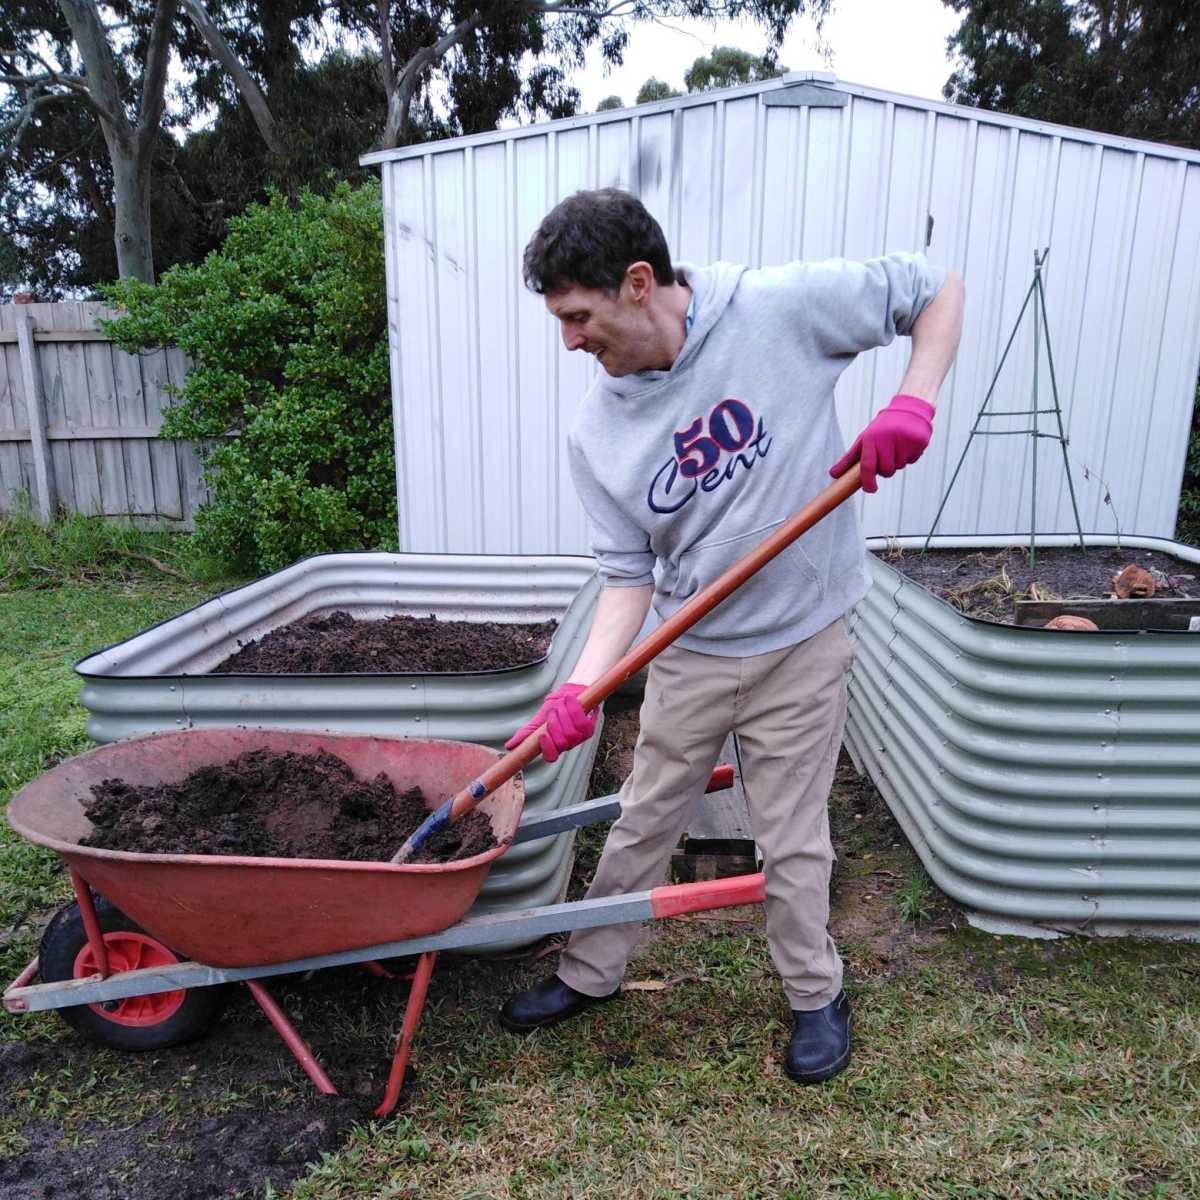 A man wearing a grey hoodie, tan pants and pink gardening gloves is shoveling dirt from a wheel barrow into raised garden beds.